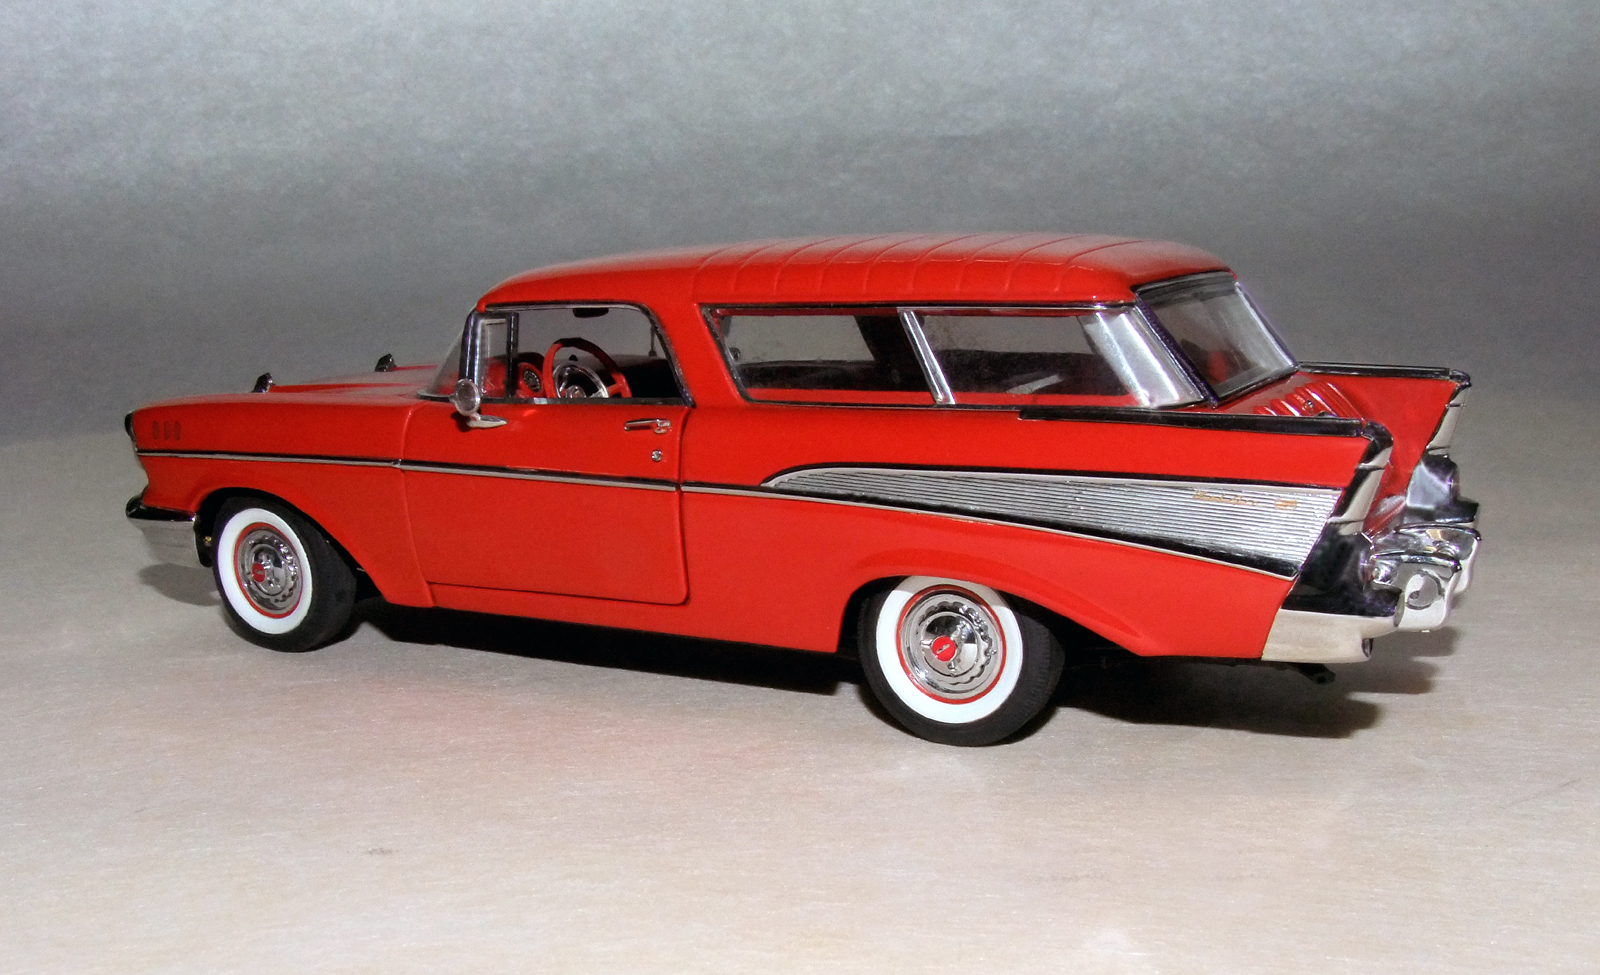 /'57 Chevy Nomad Antique Car Twin Quilt; /'57 Chevy Chevy Truck Chrysler /'32 Ford Coup and More.....